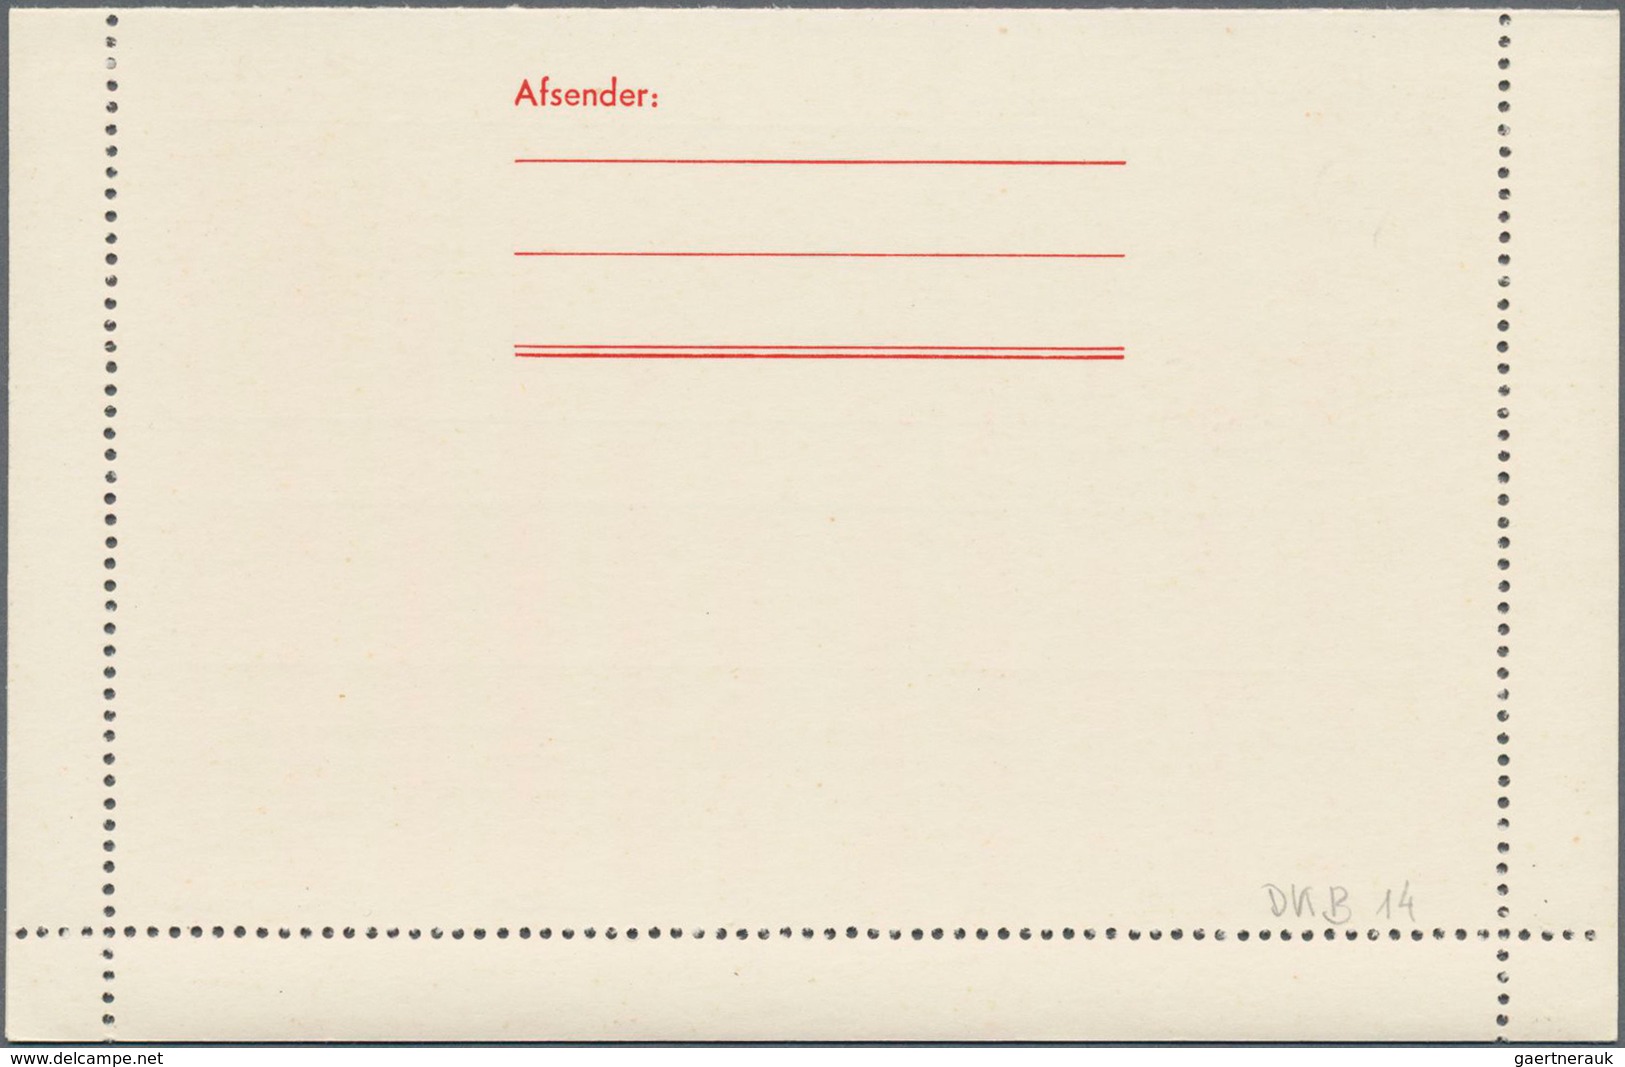 Dänemark - Ganzsachen: 1953/63 four unused service card letters for the personal register, 360 M€, v